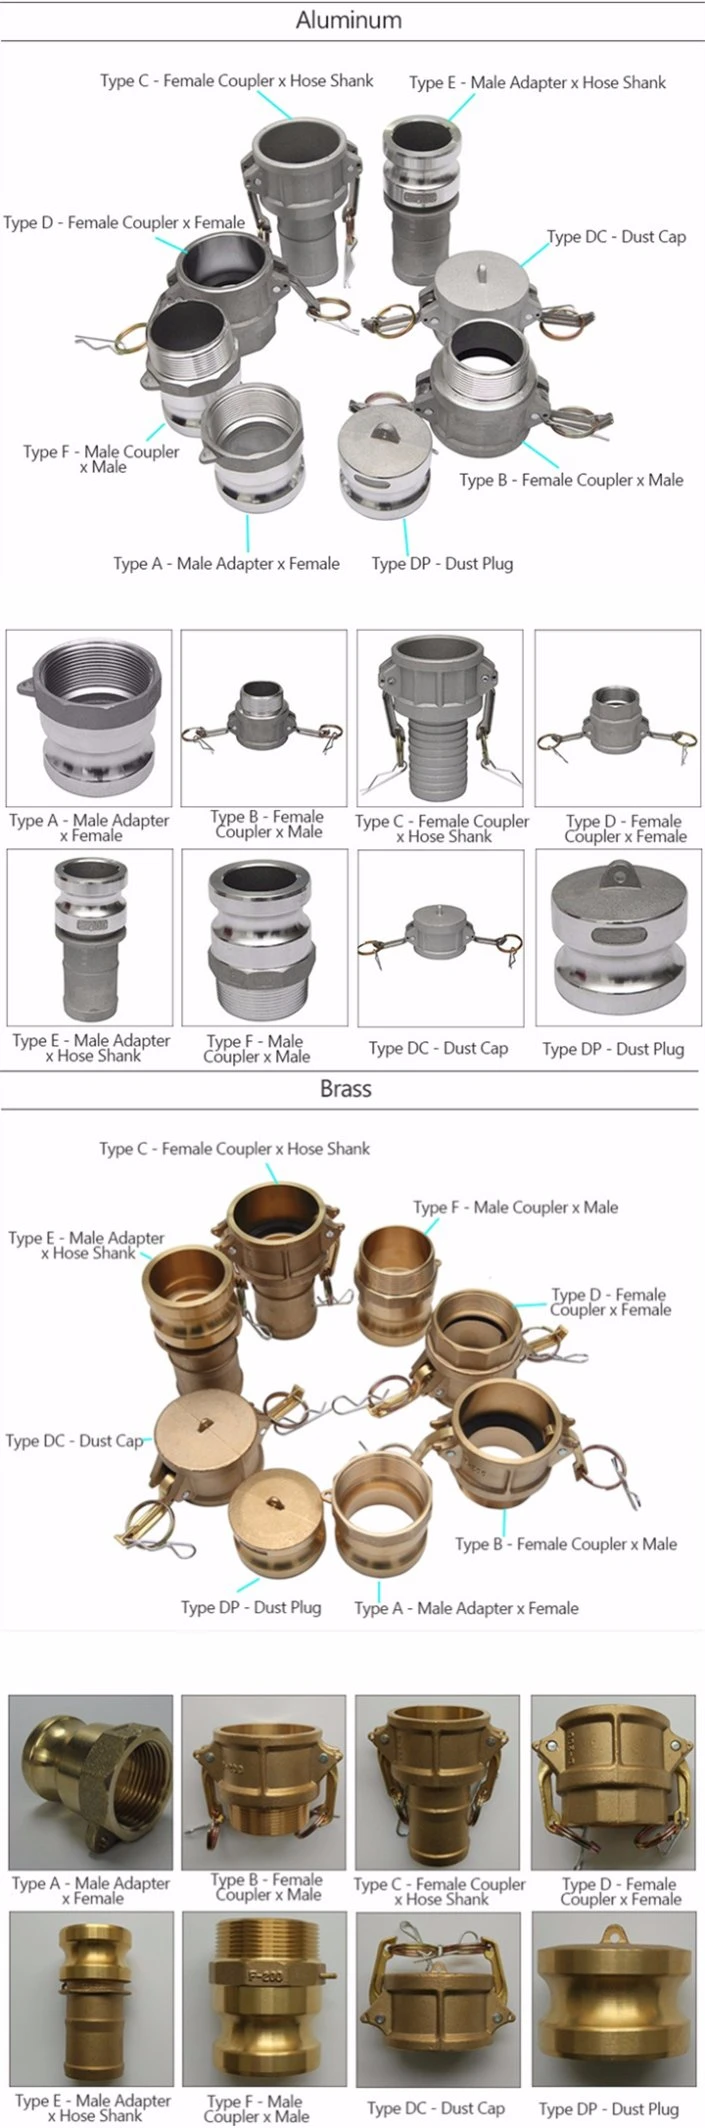 Water Quick Hose Shank Camlock Coupling for PVC Hoses